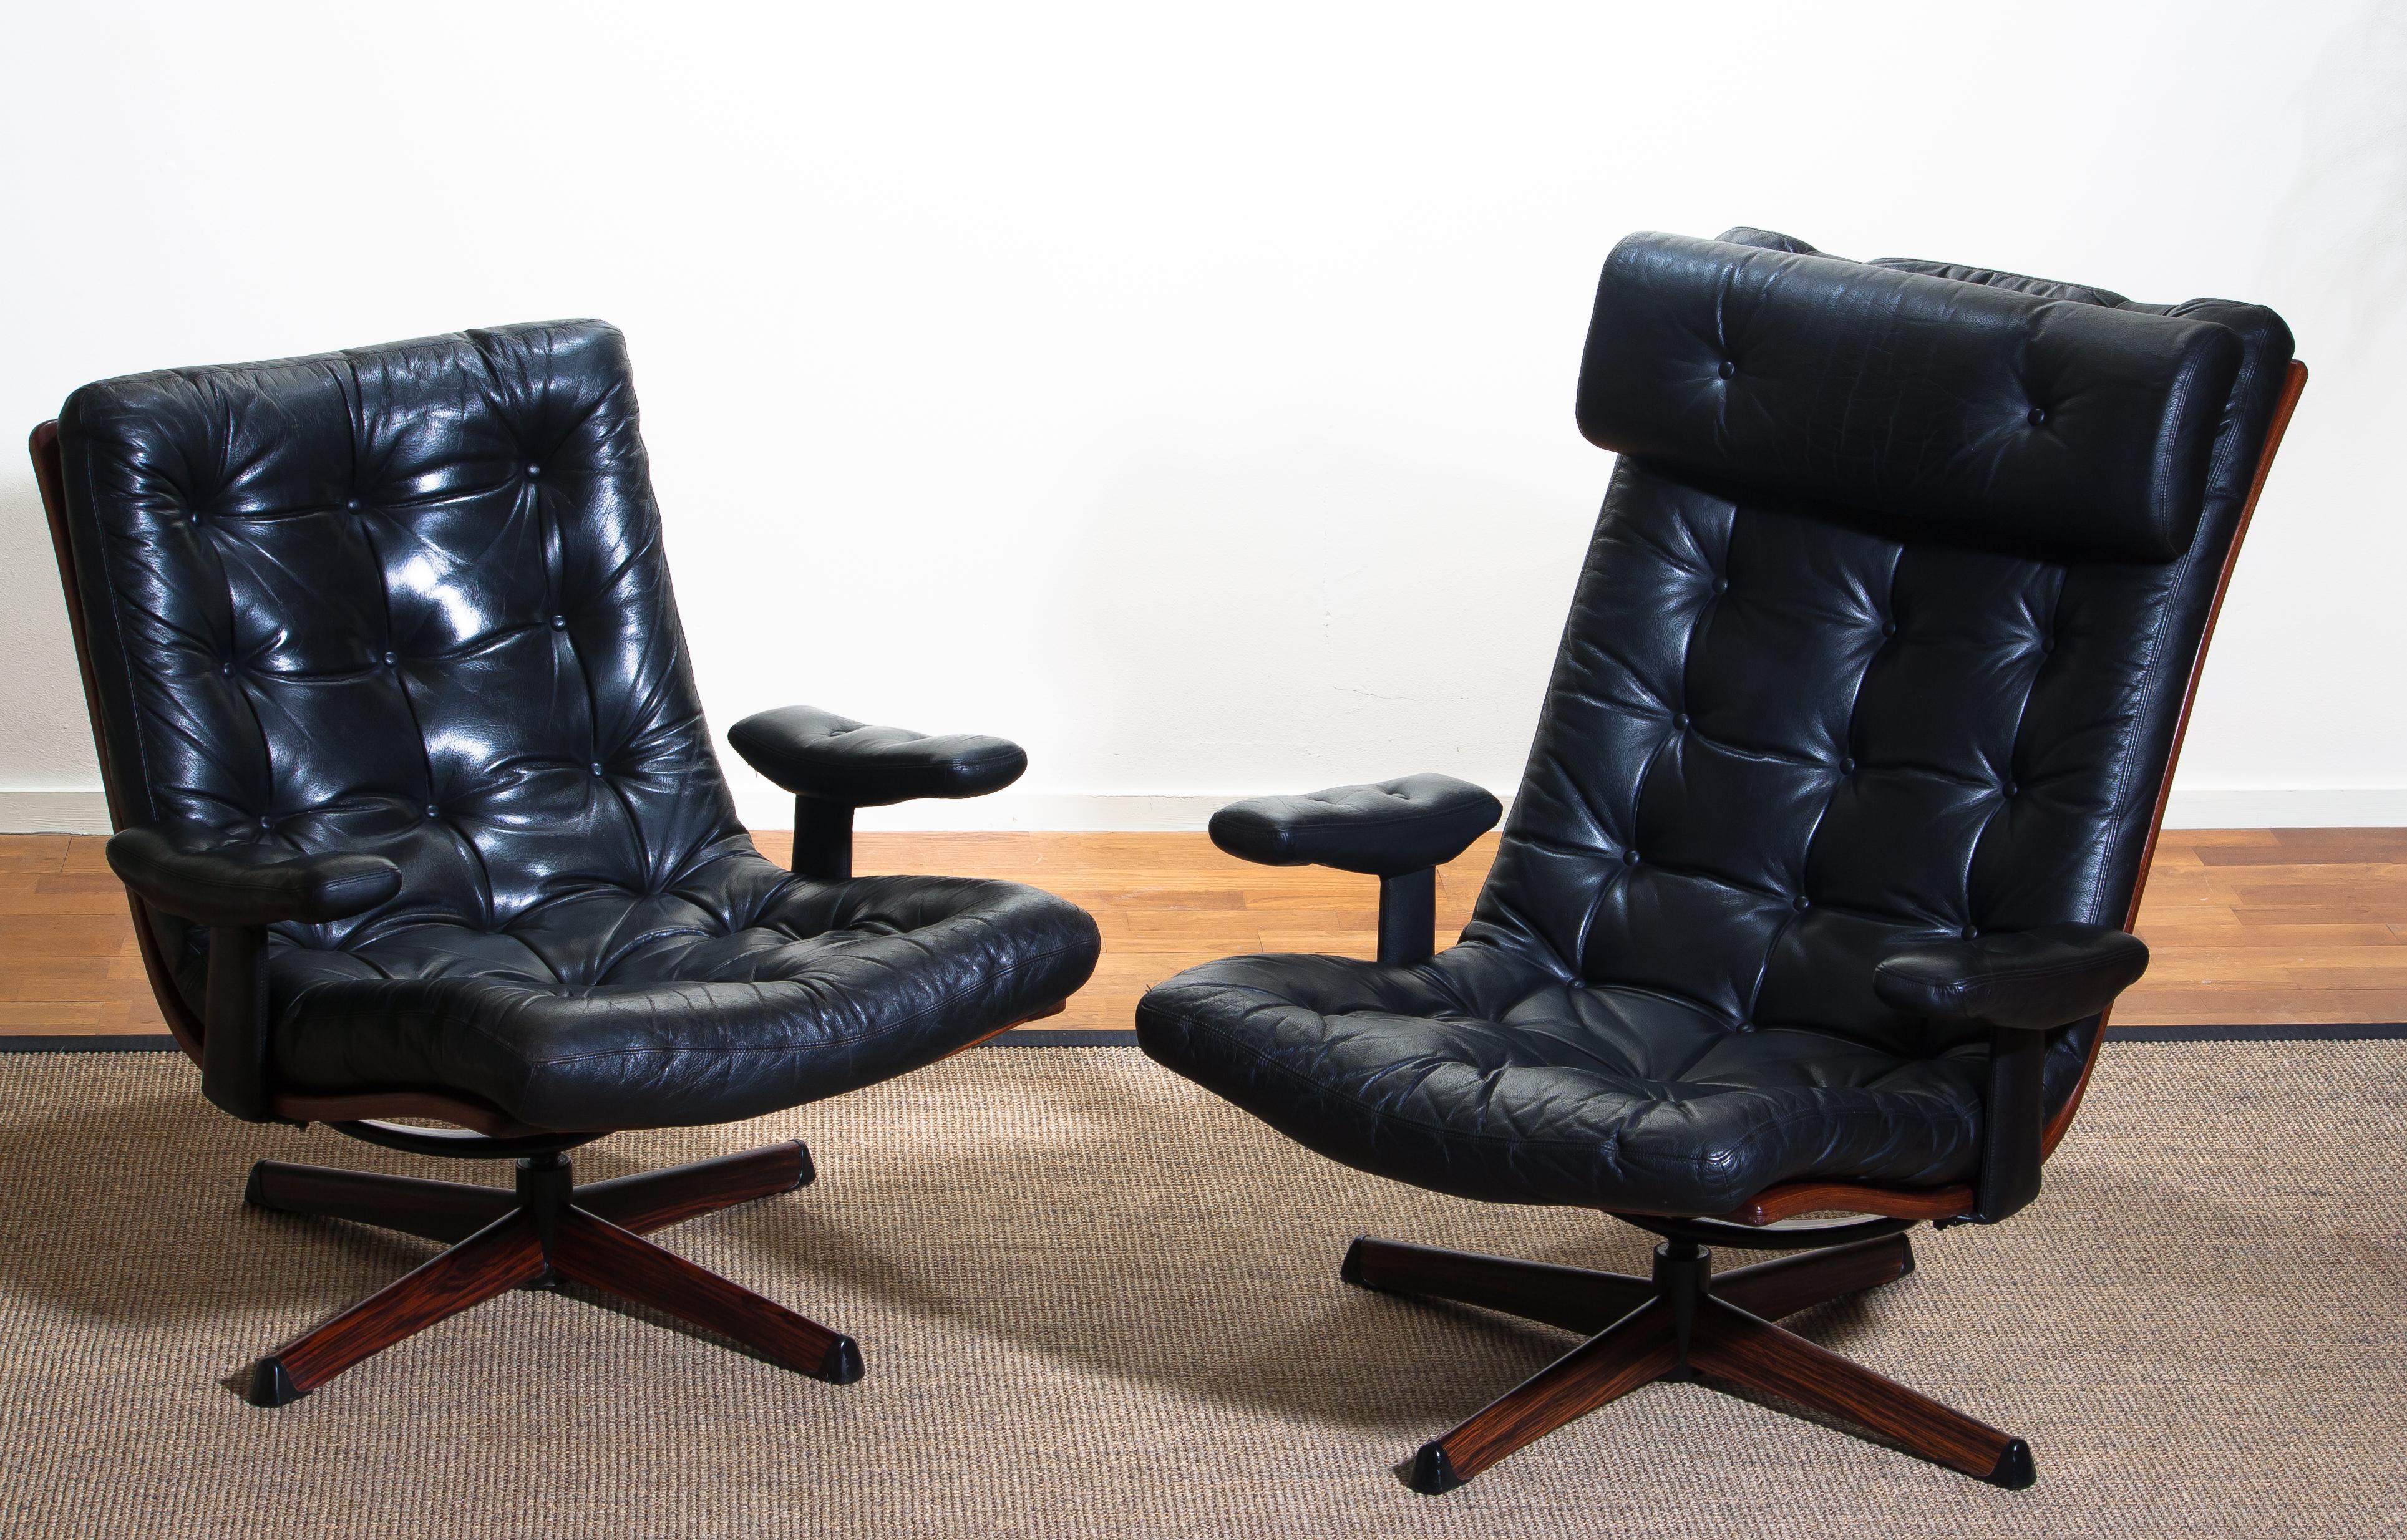 Beautiful set of two extremely comfortable and matching swivel chairs by Gote Design Nassjo Sweden, 1960
The metal swivel stands are covered with an Jakaranda print.
The chairs are upholstered with black sturdy leather and all in perfect